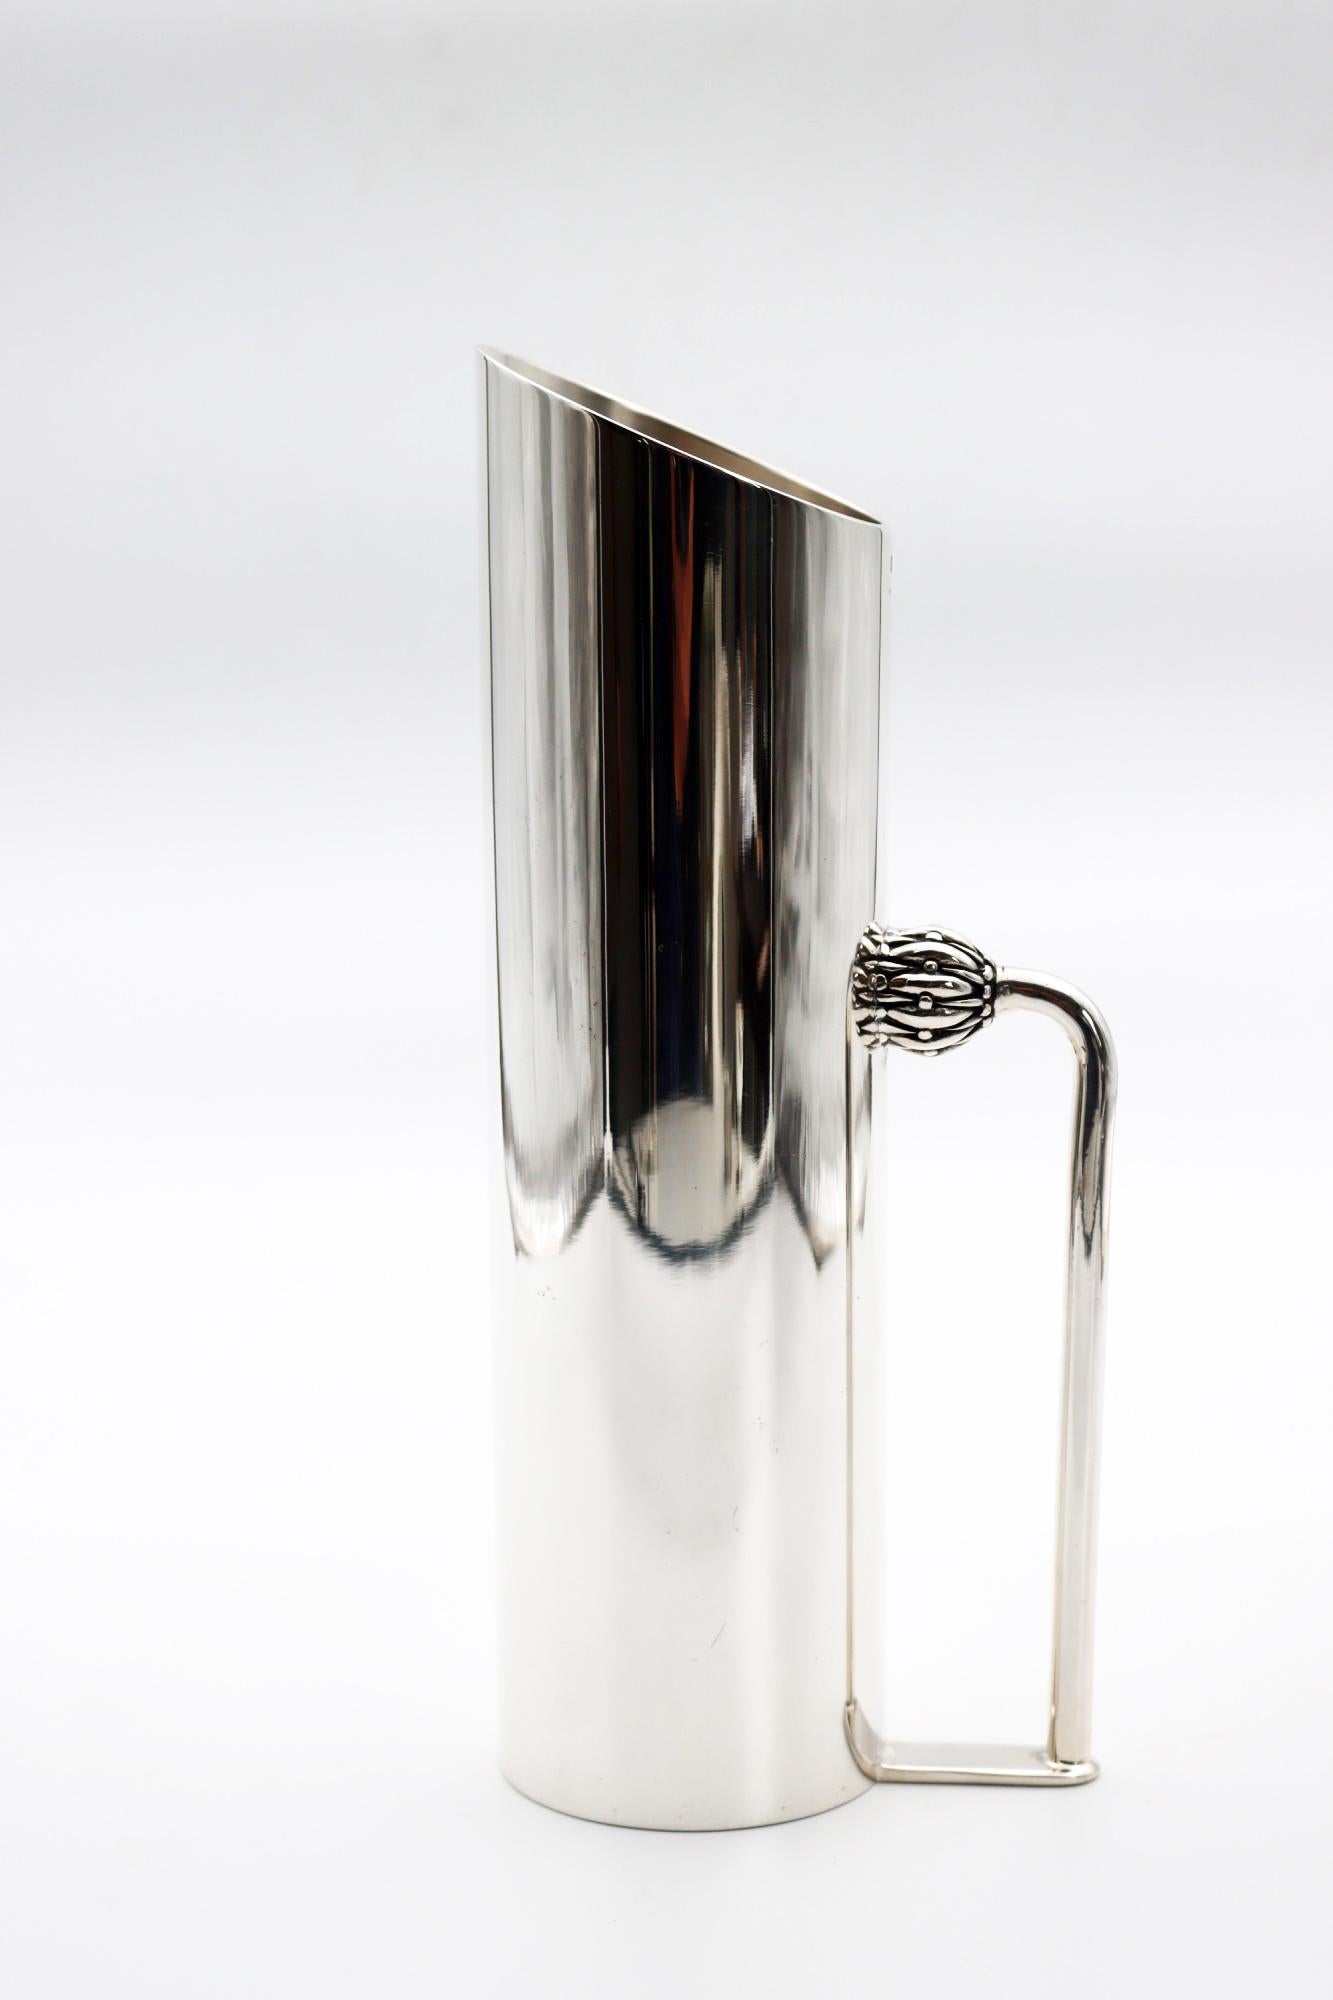 Carafe small or tall model in silver bronze 

0.5 litre decanter in silver bronze 35/42 microns 
H: 205 mm, d: 70 mm

1 litre decanter in silver plated bronze 35/42 microns
H: 250 mm, d: 70 mm

These decanters are the handmade work of French